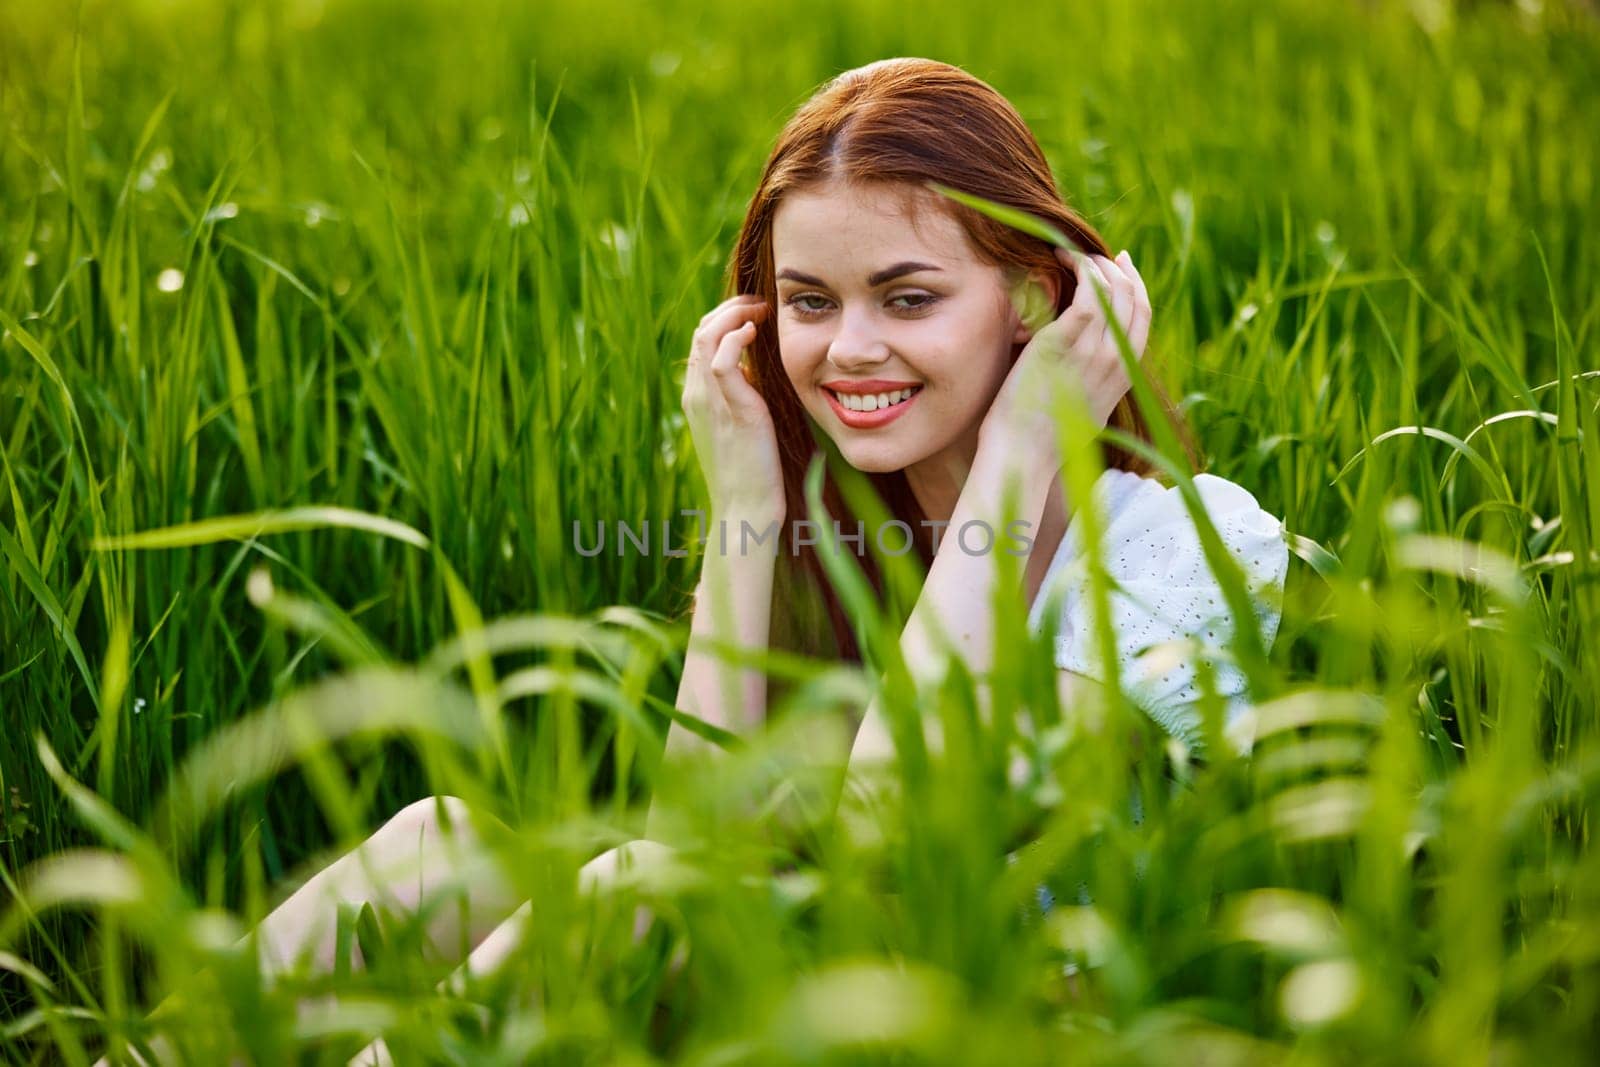 beautiful, elegant woman with red hair sits in tall green grass and smiles. High quality photo